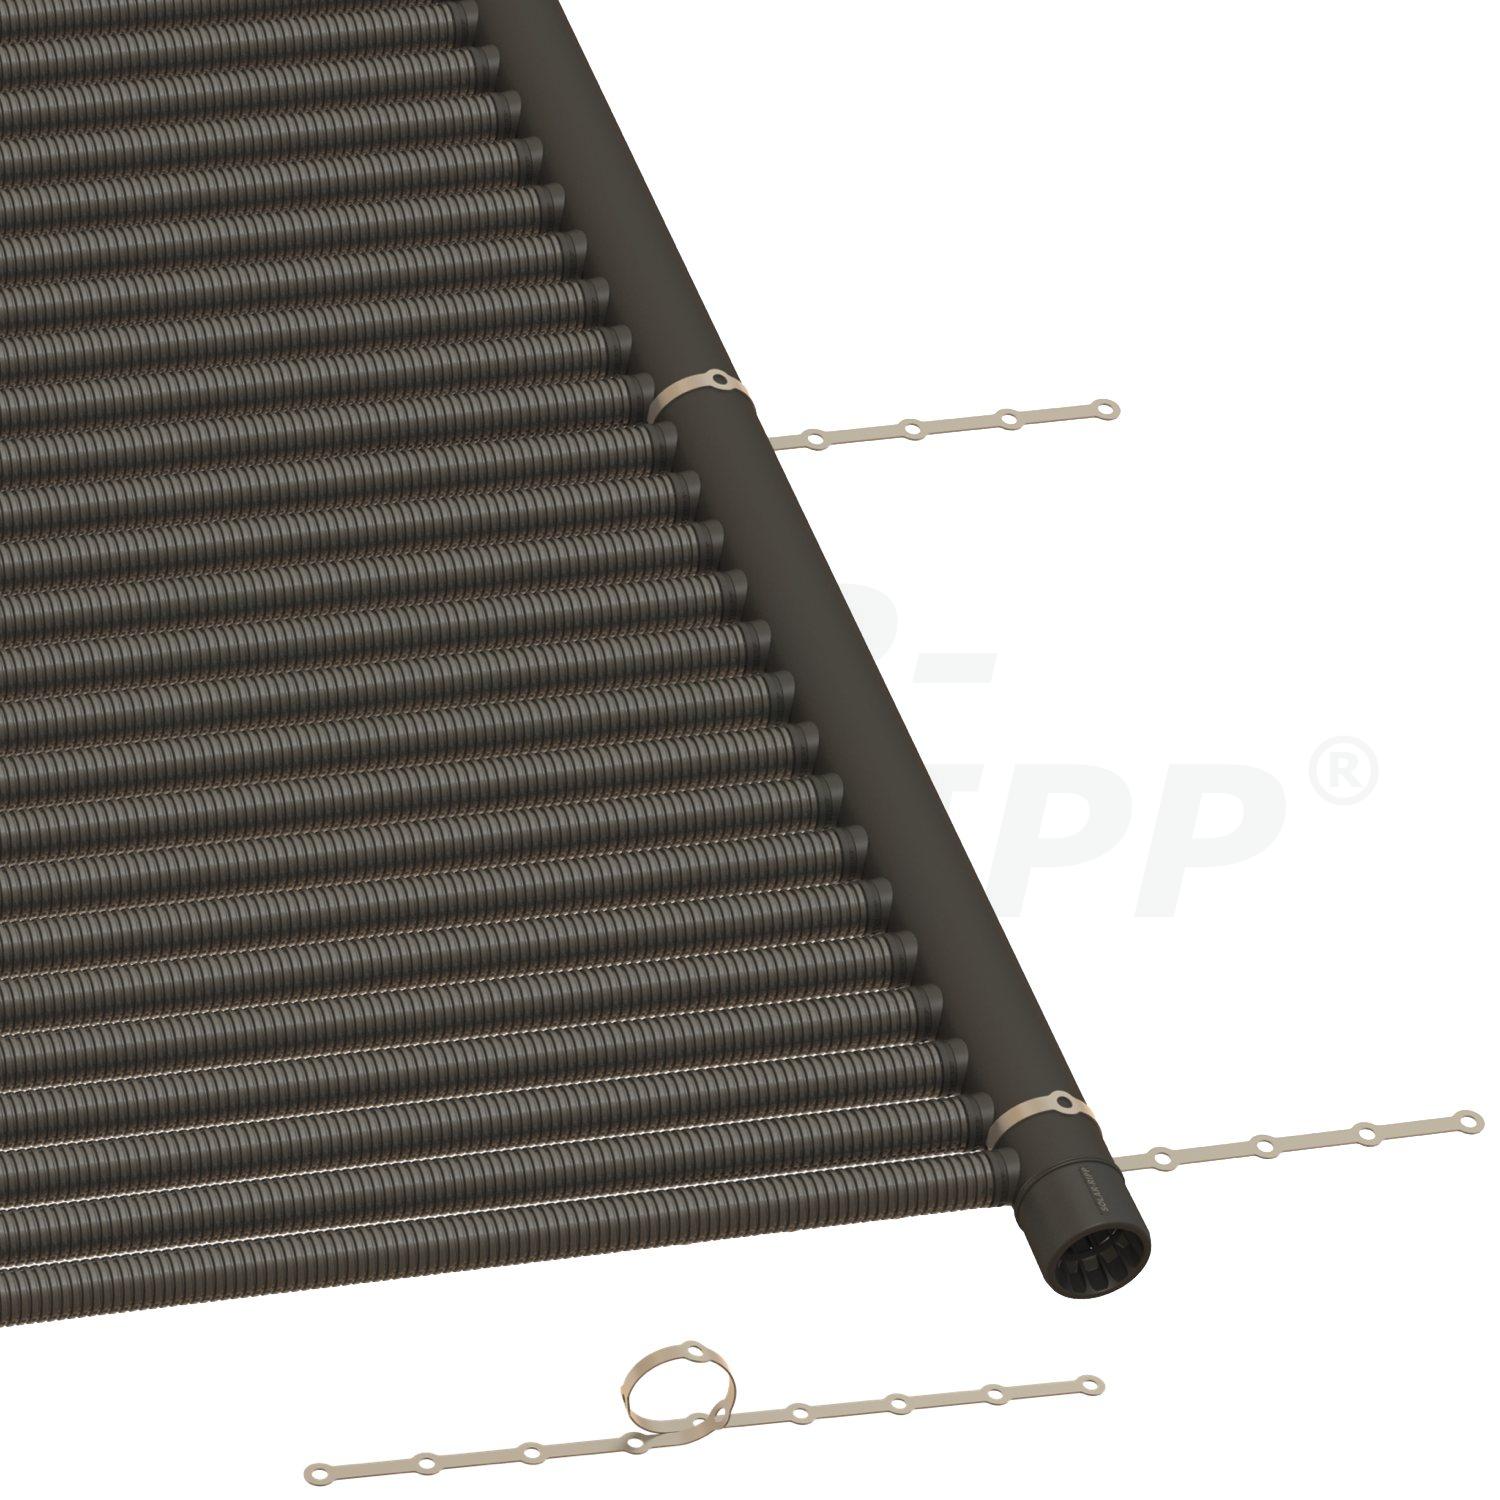 Perforated strips for fastening the SOLAR-RIPP ® distributor/collector